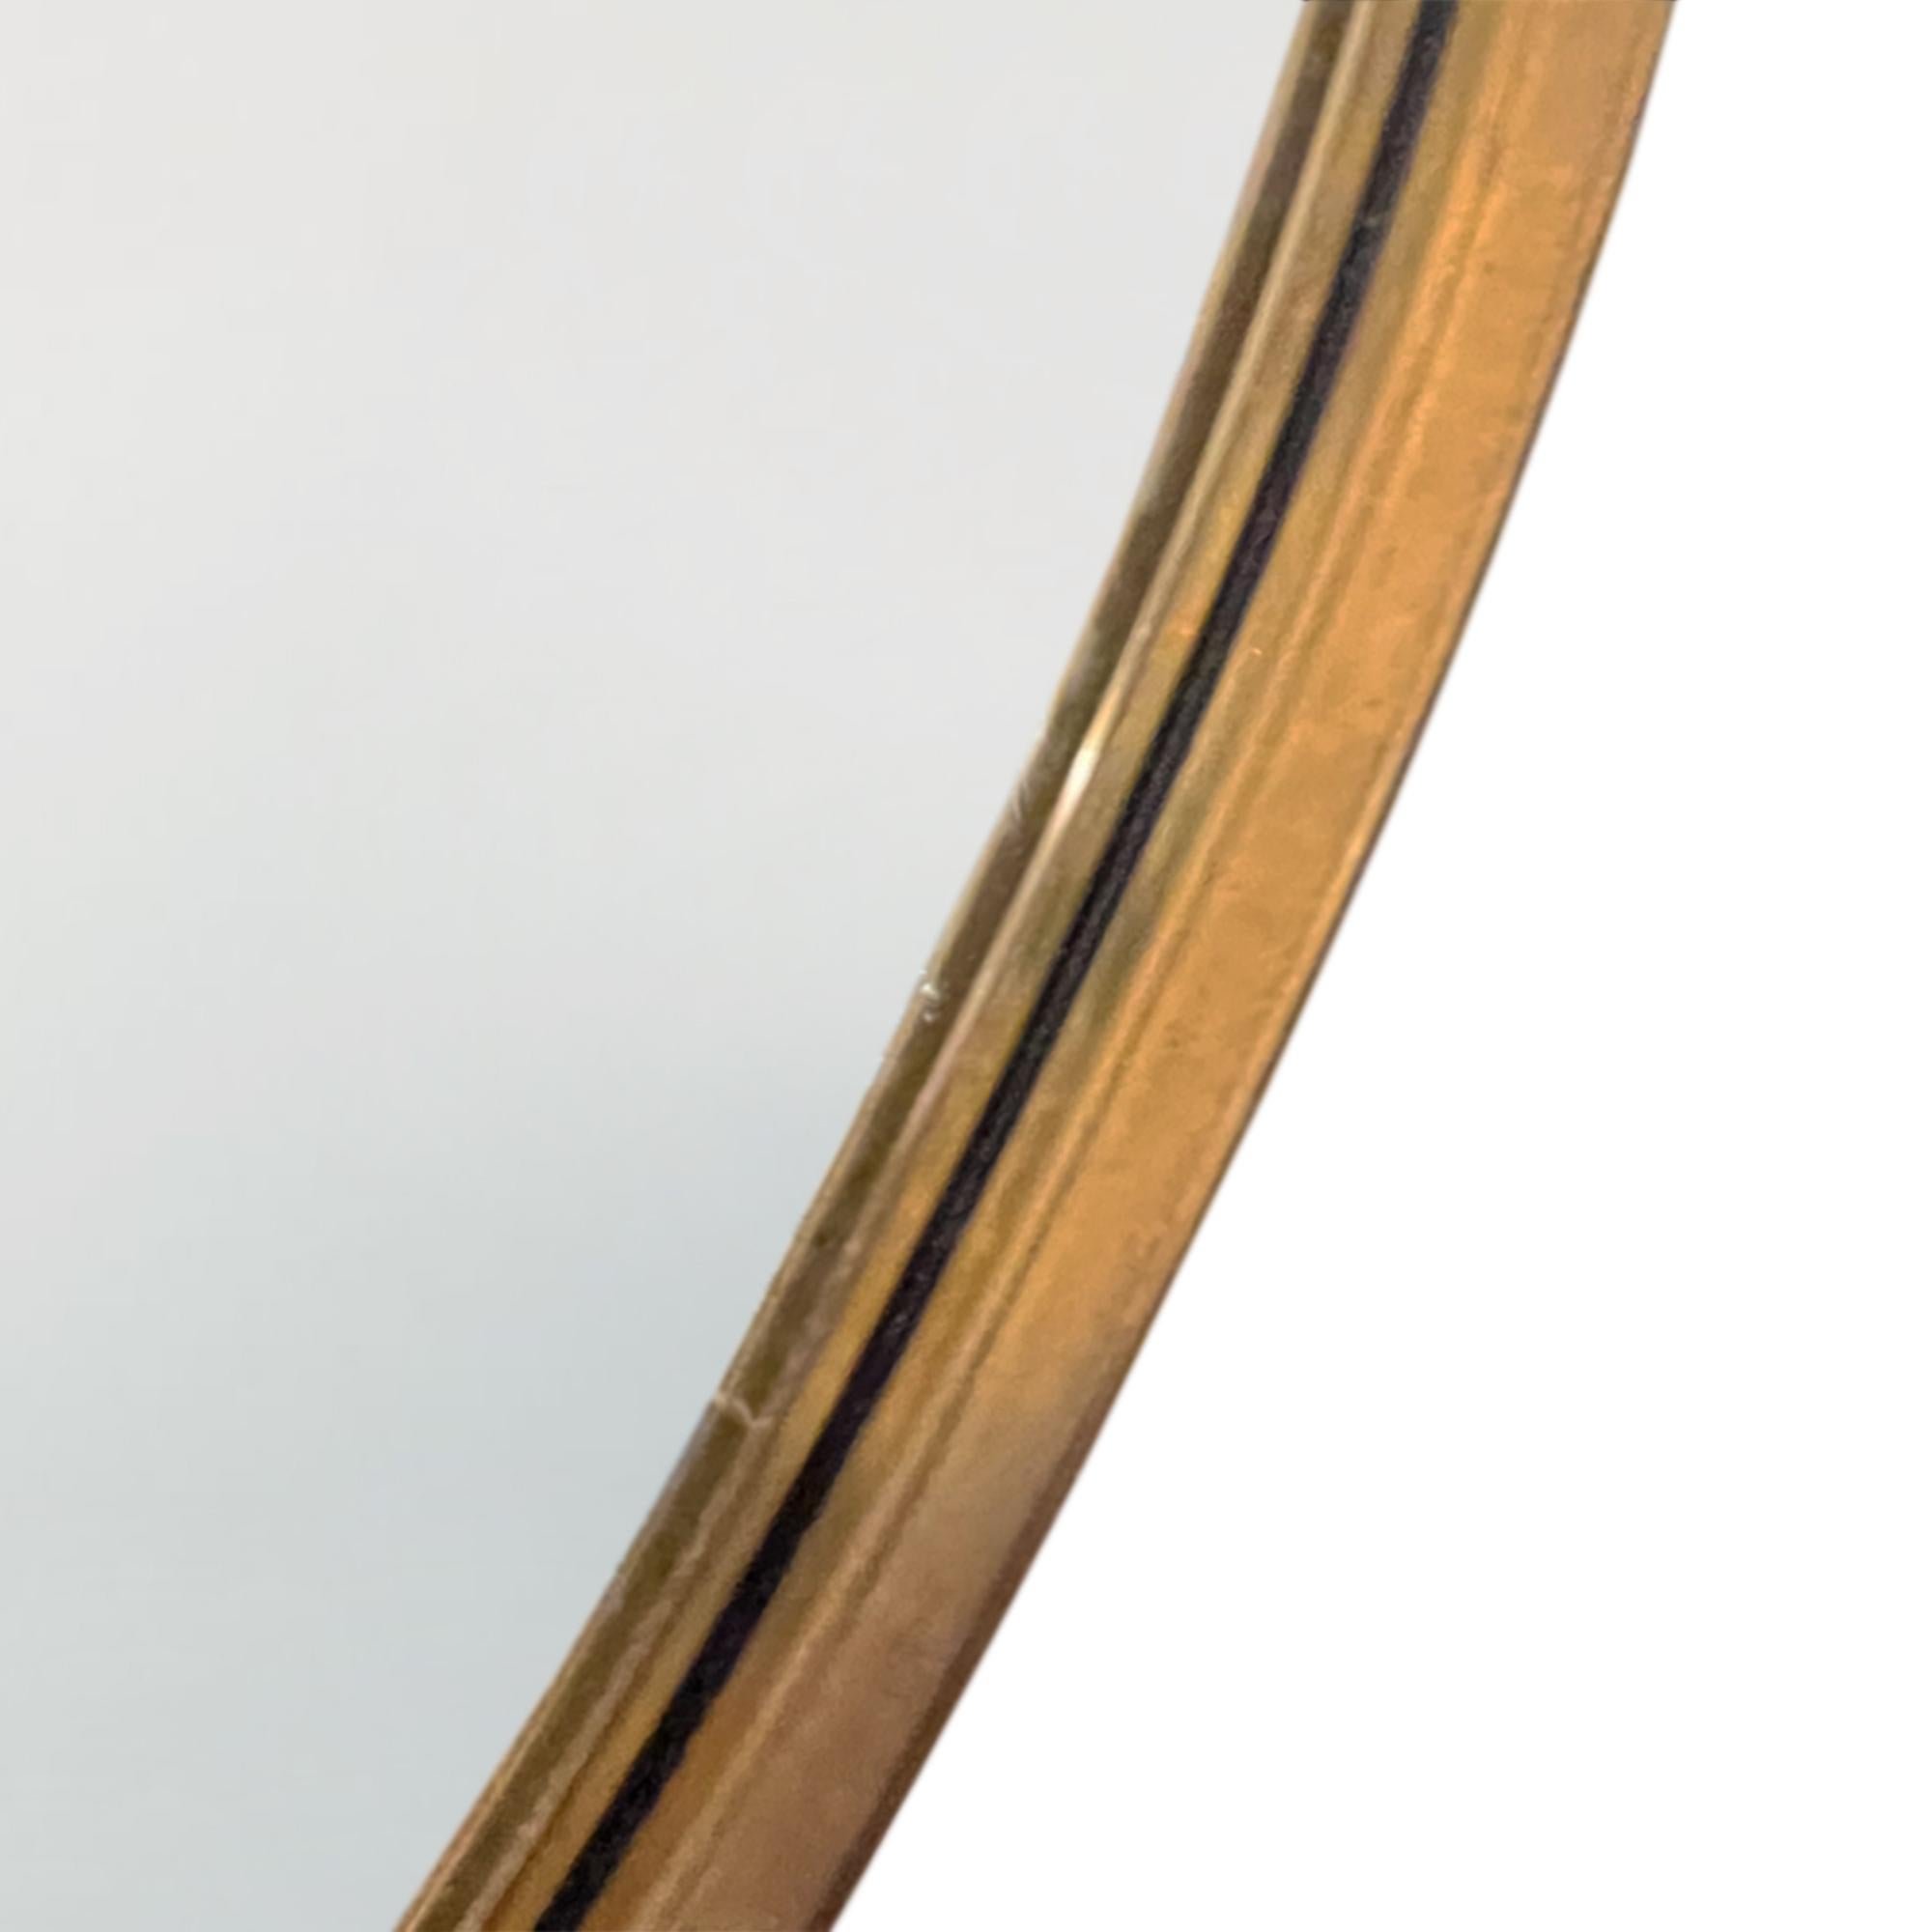 This is a lovely mirror - simple, elegant design so typical of the French midcentury style.

Good proportions for a living room or bedroom and nicely shaped. 

Please see all our pictures to see the detail and design of the frame. The original plate